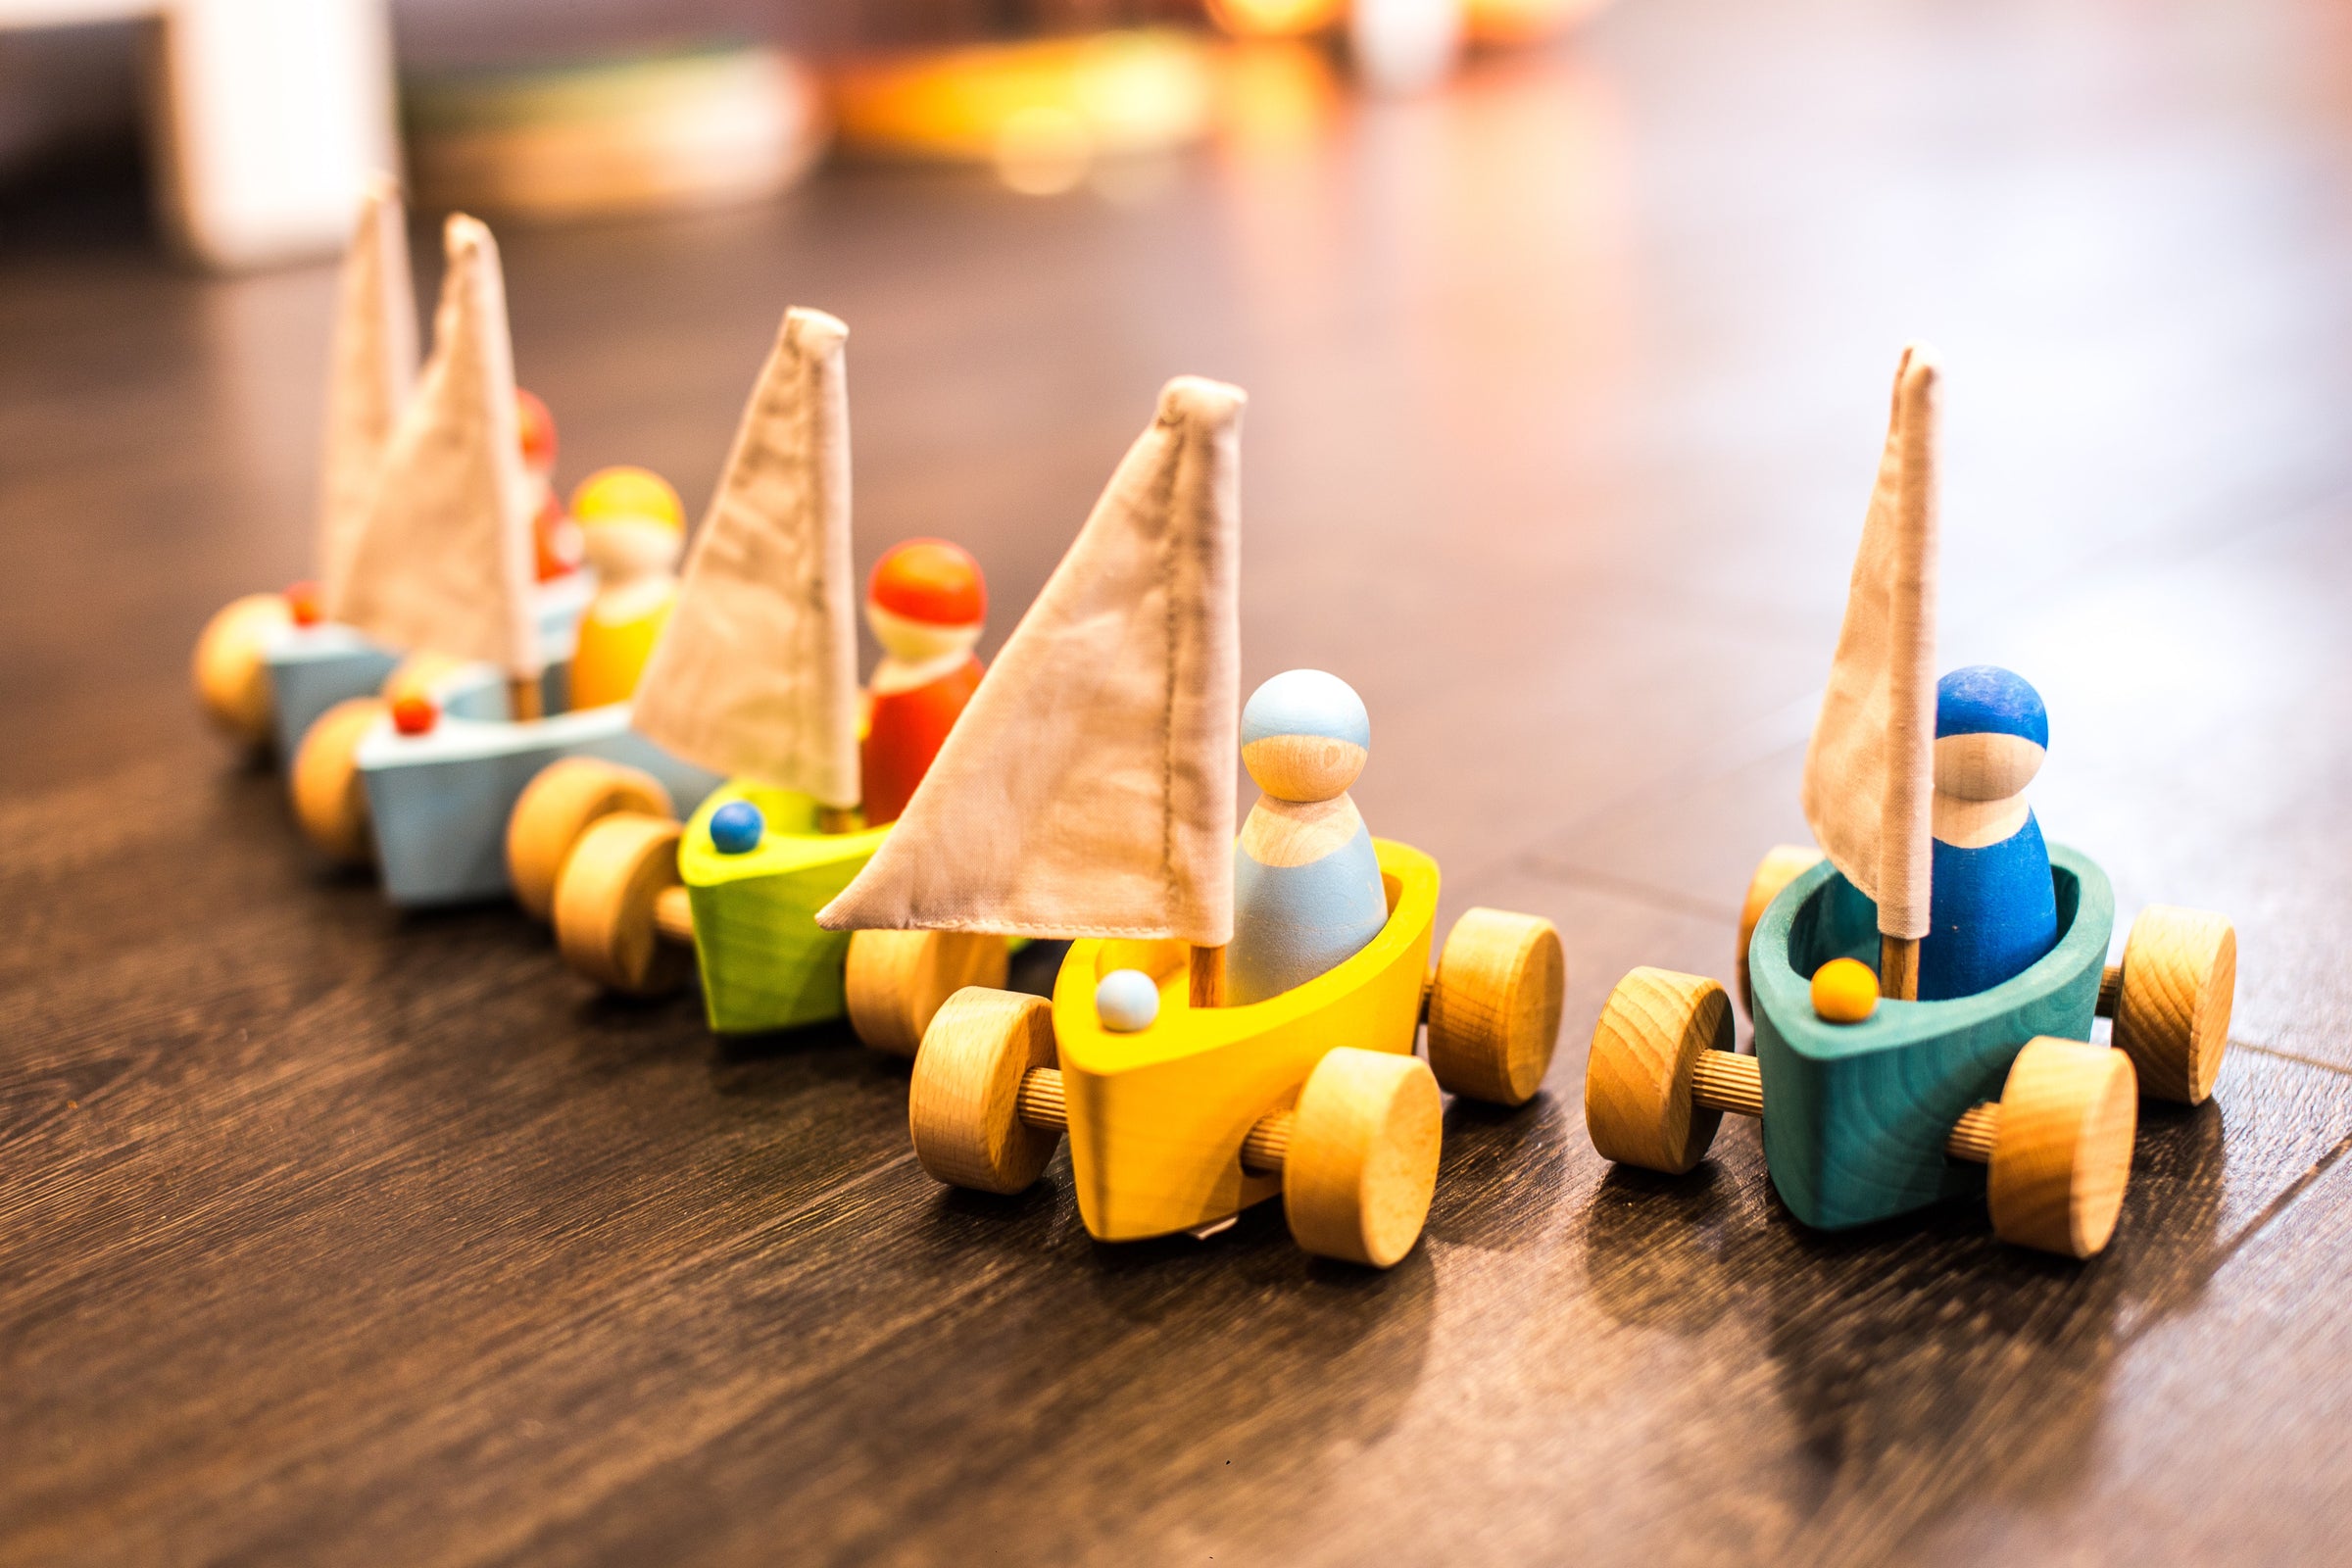 WOODEN TOYS